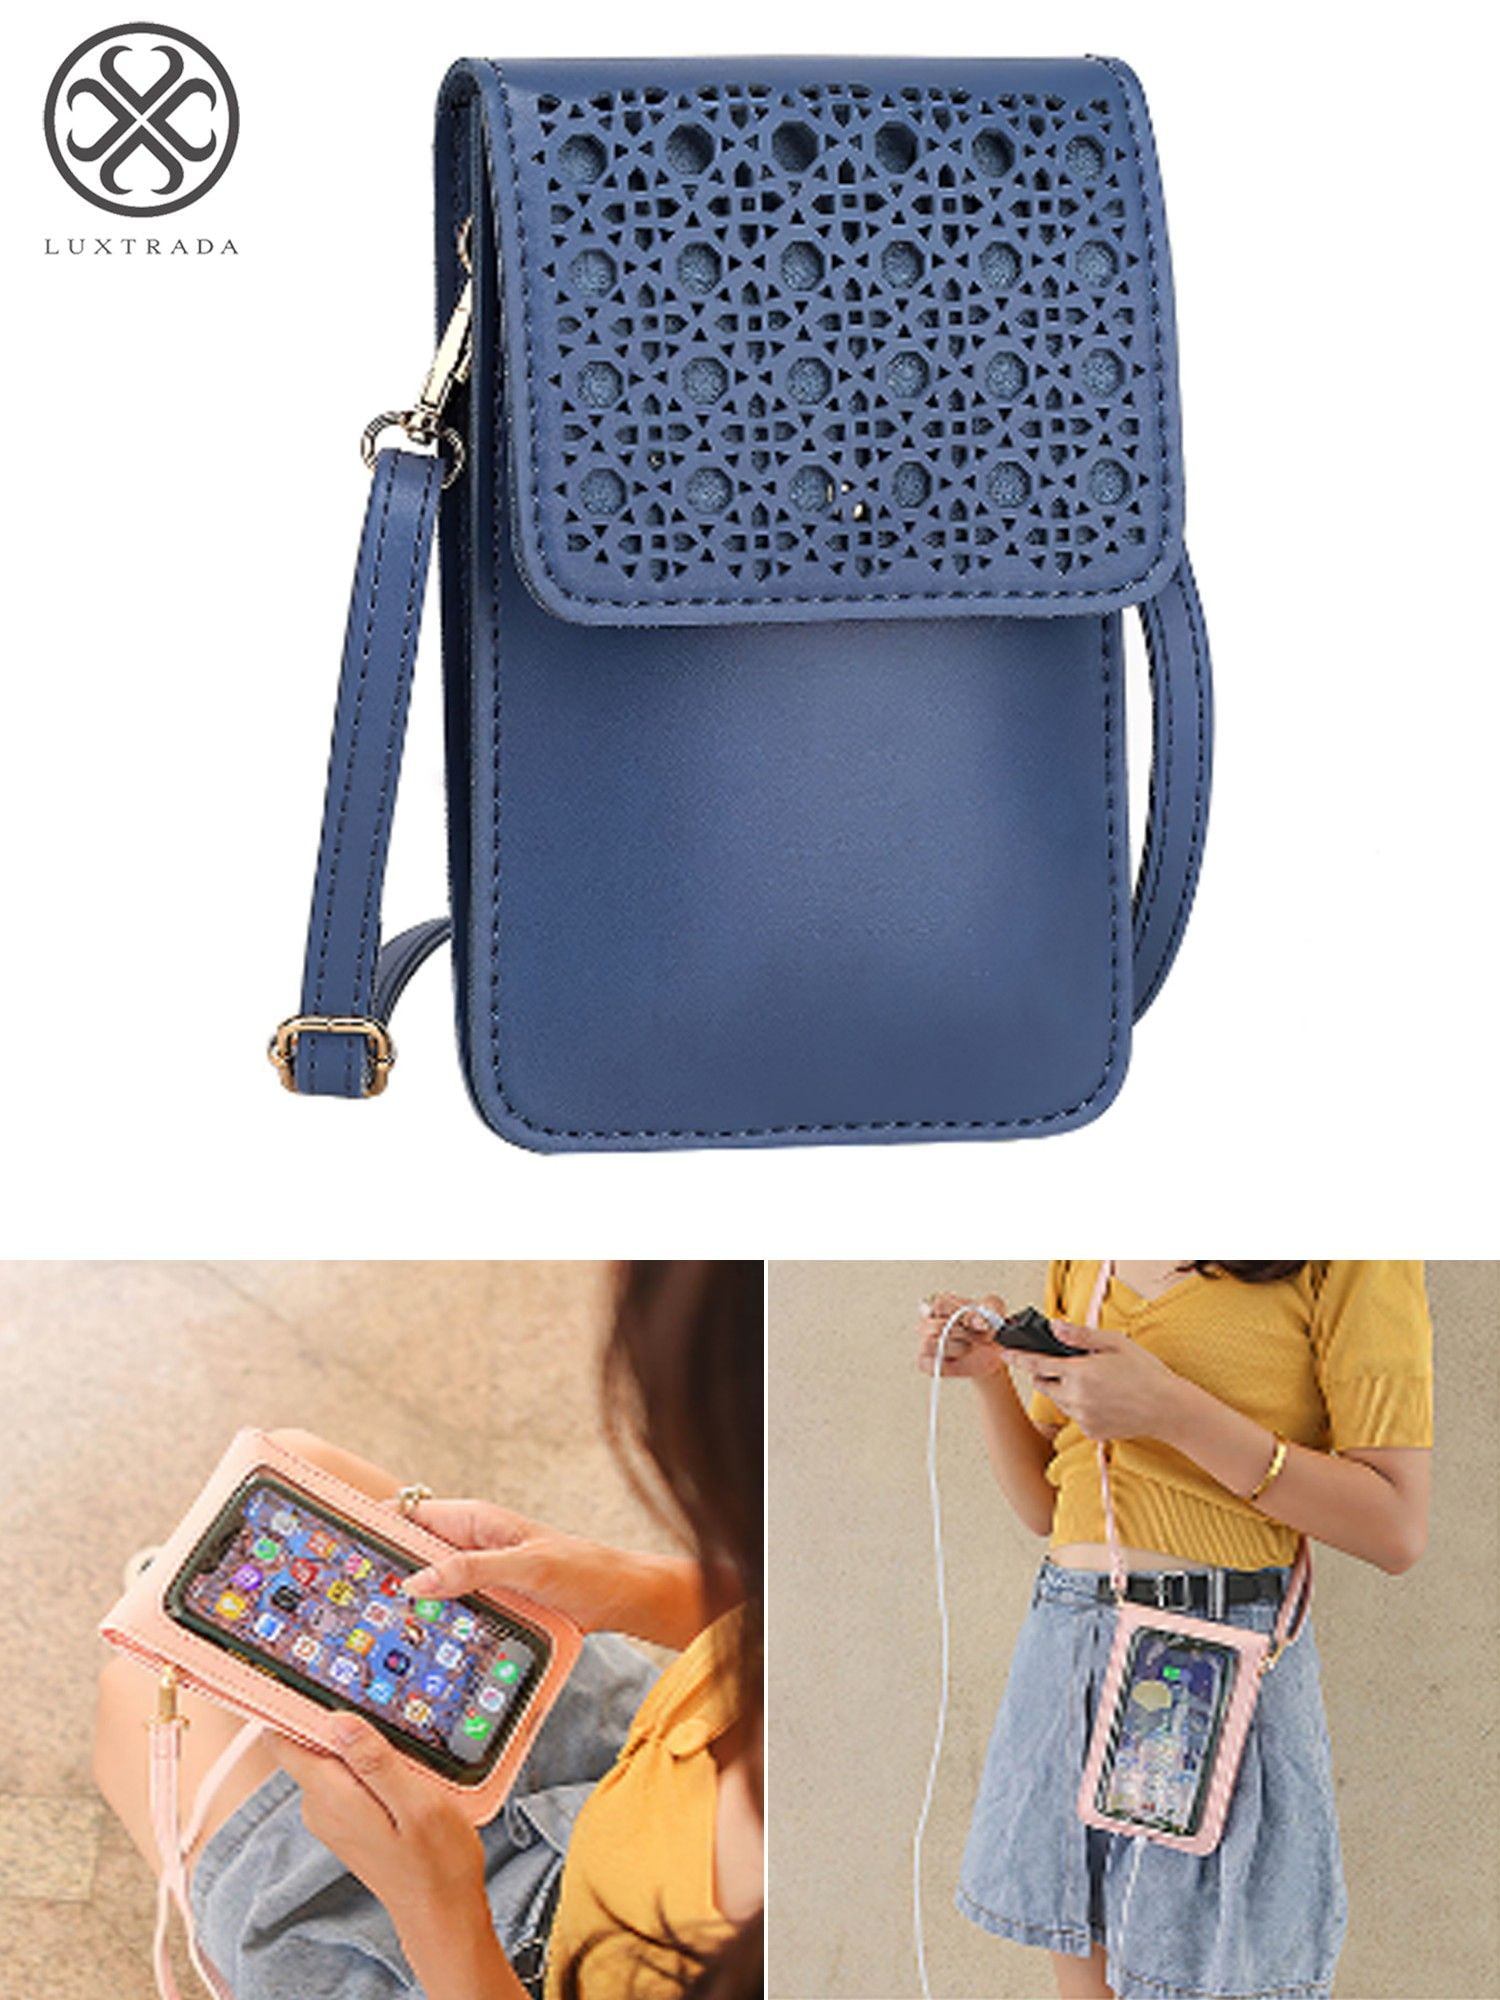 Luxtrada Cell Phone Bag, PU Leather Cell Phone Purse, Small Crossbody Bag  Cell Phone Pouch Shoulder Bag with Touch Screen Window and Removable Strap